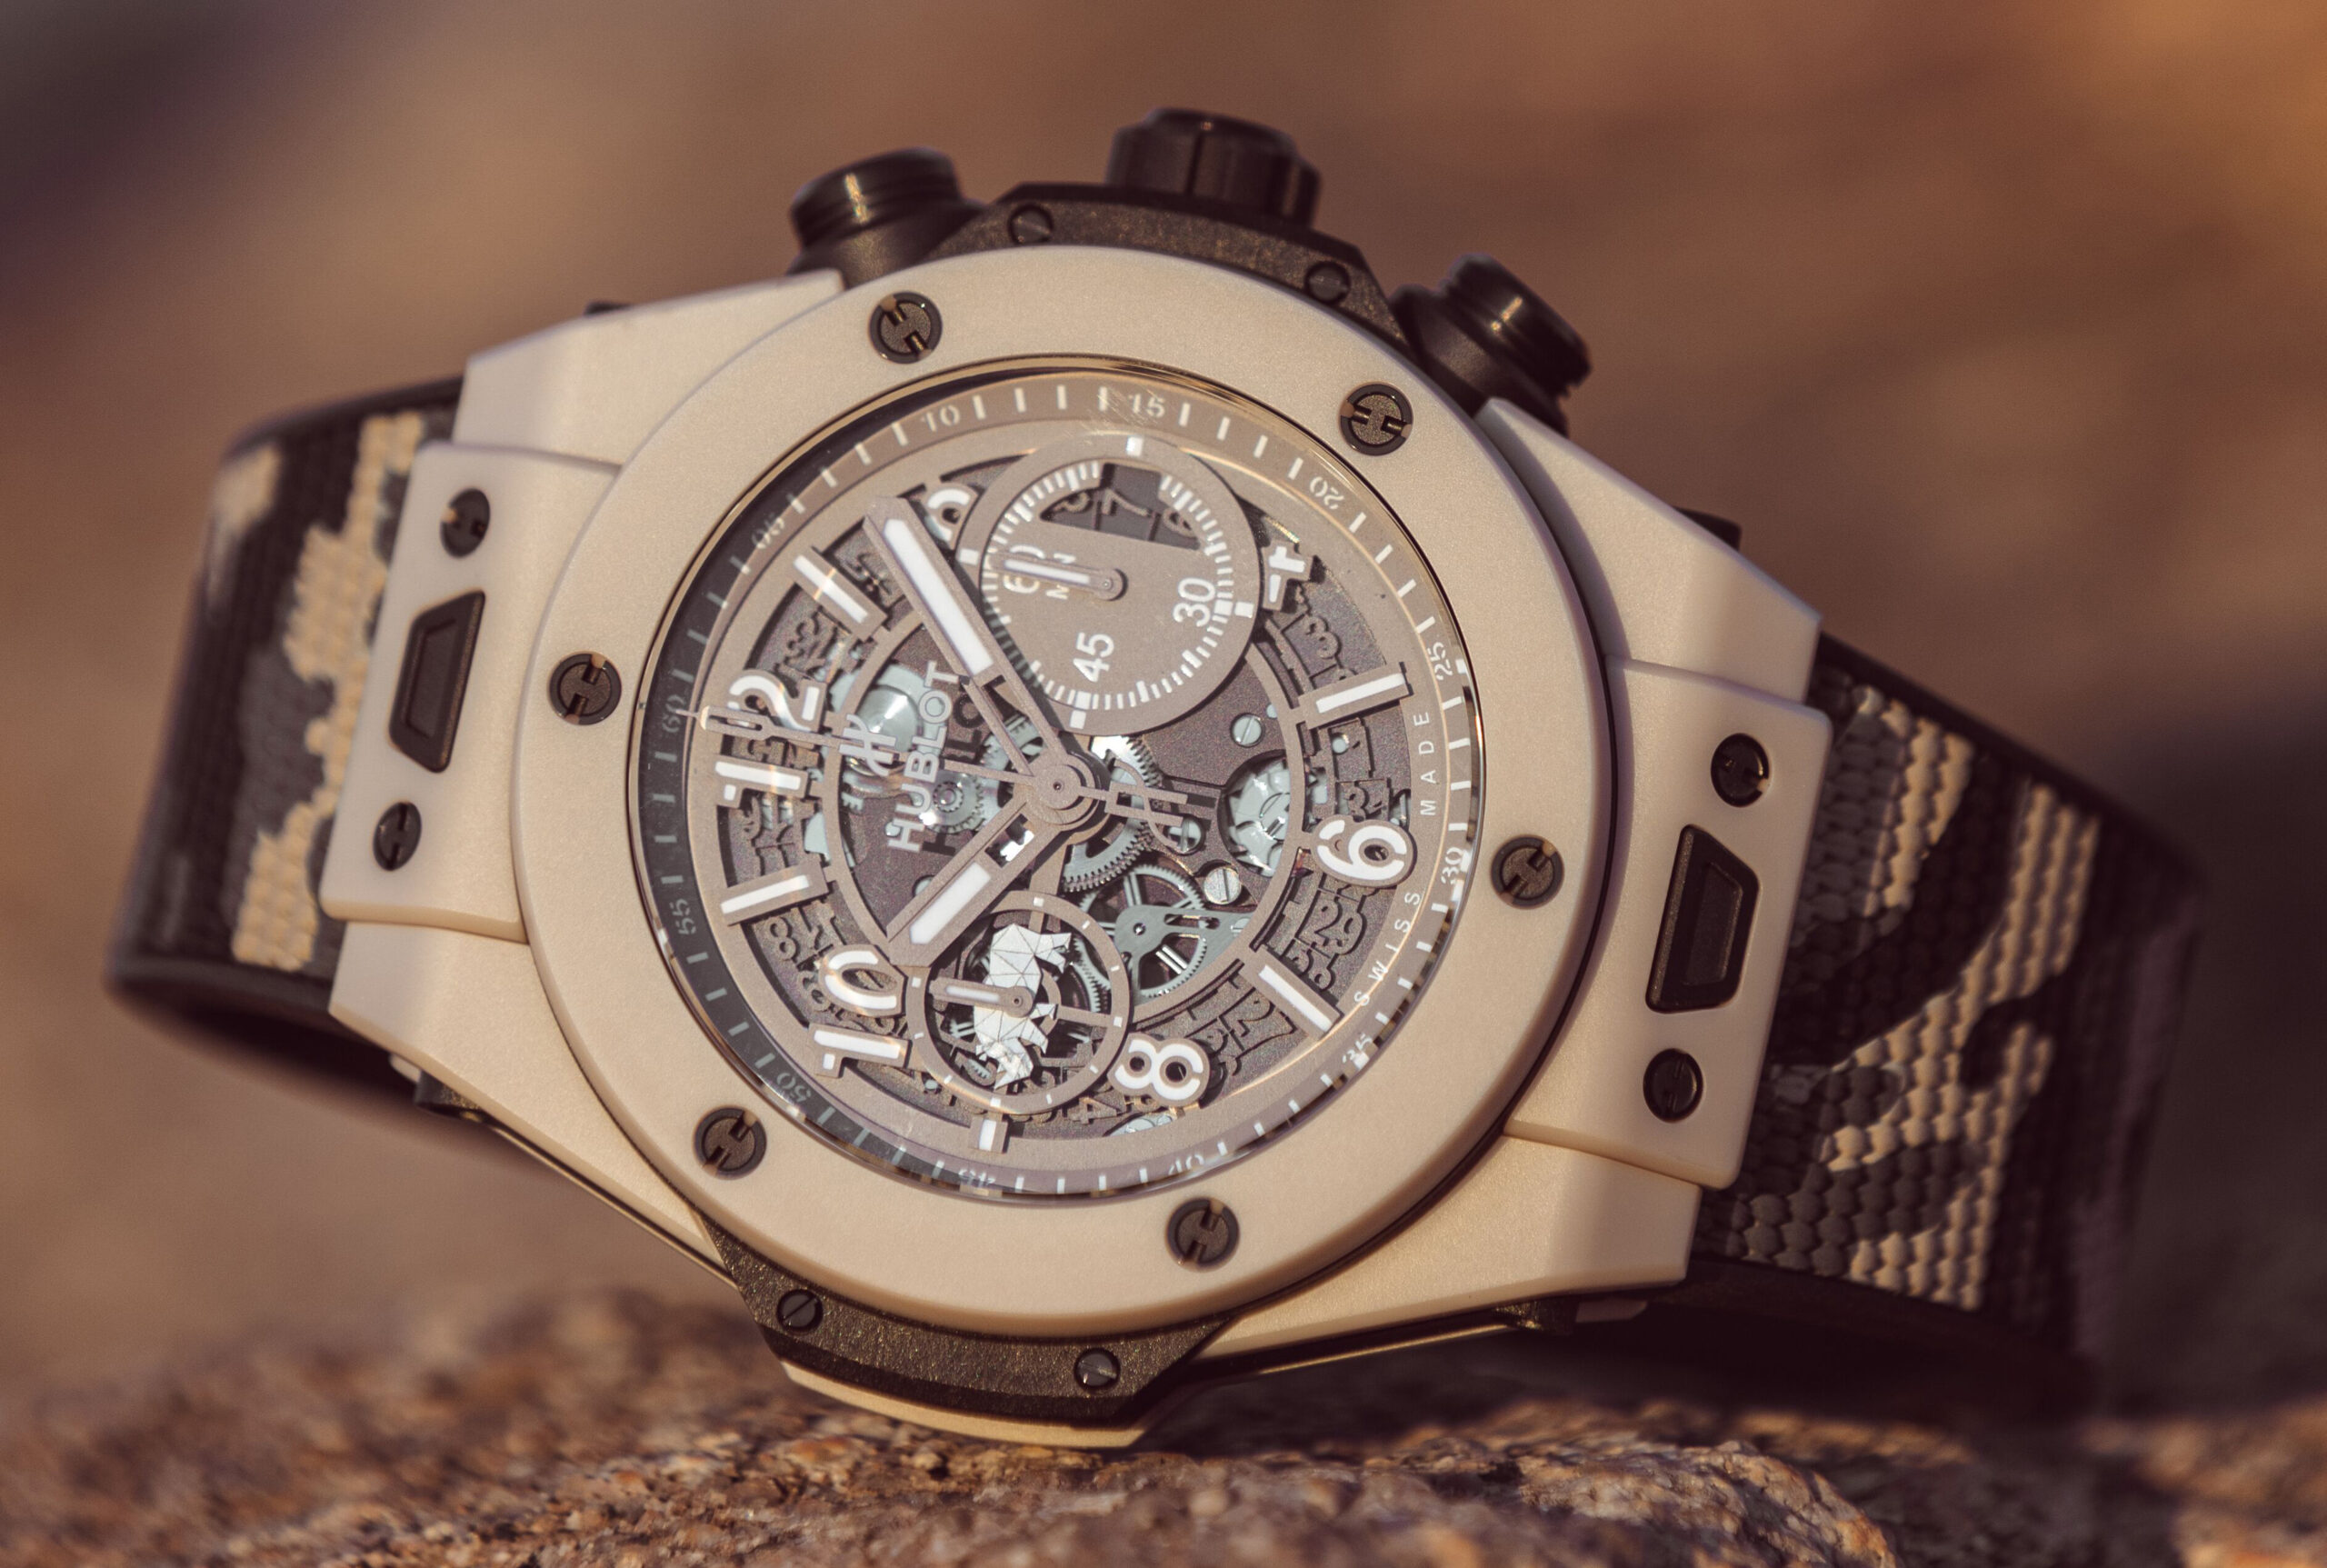 Hublot Big Bang: Combines A Star Cricketer’s Design With Conservation Cool